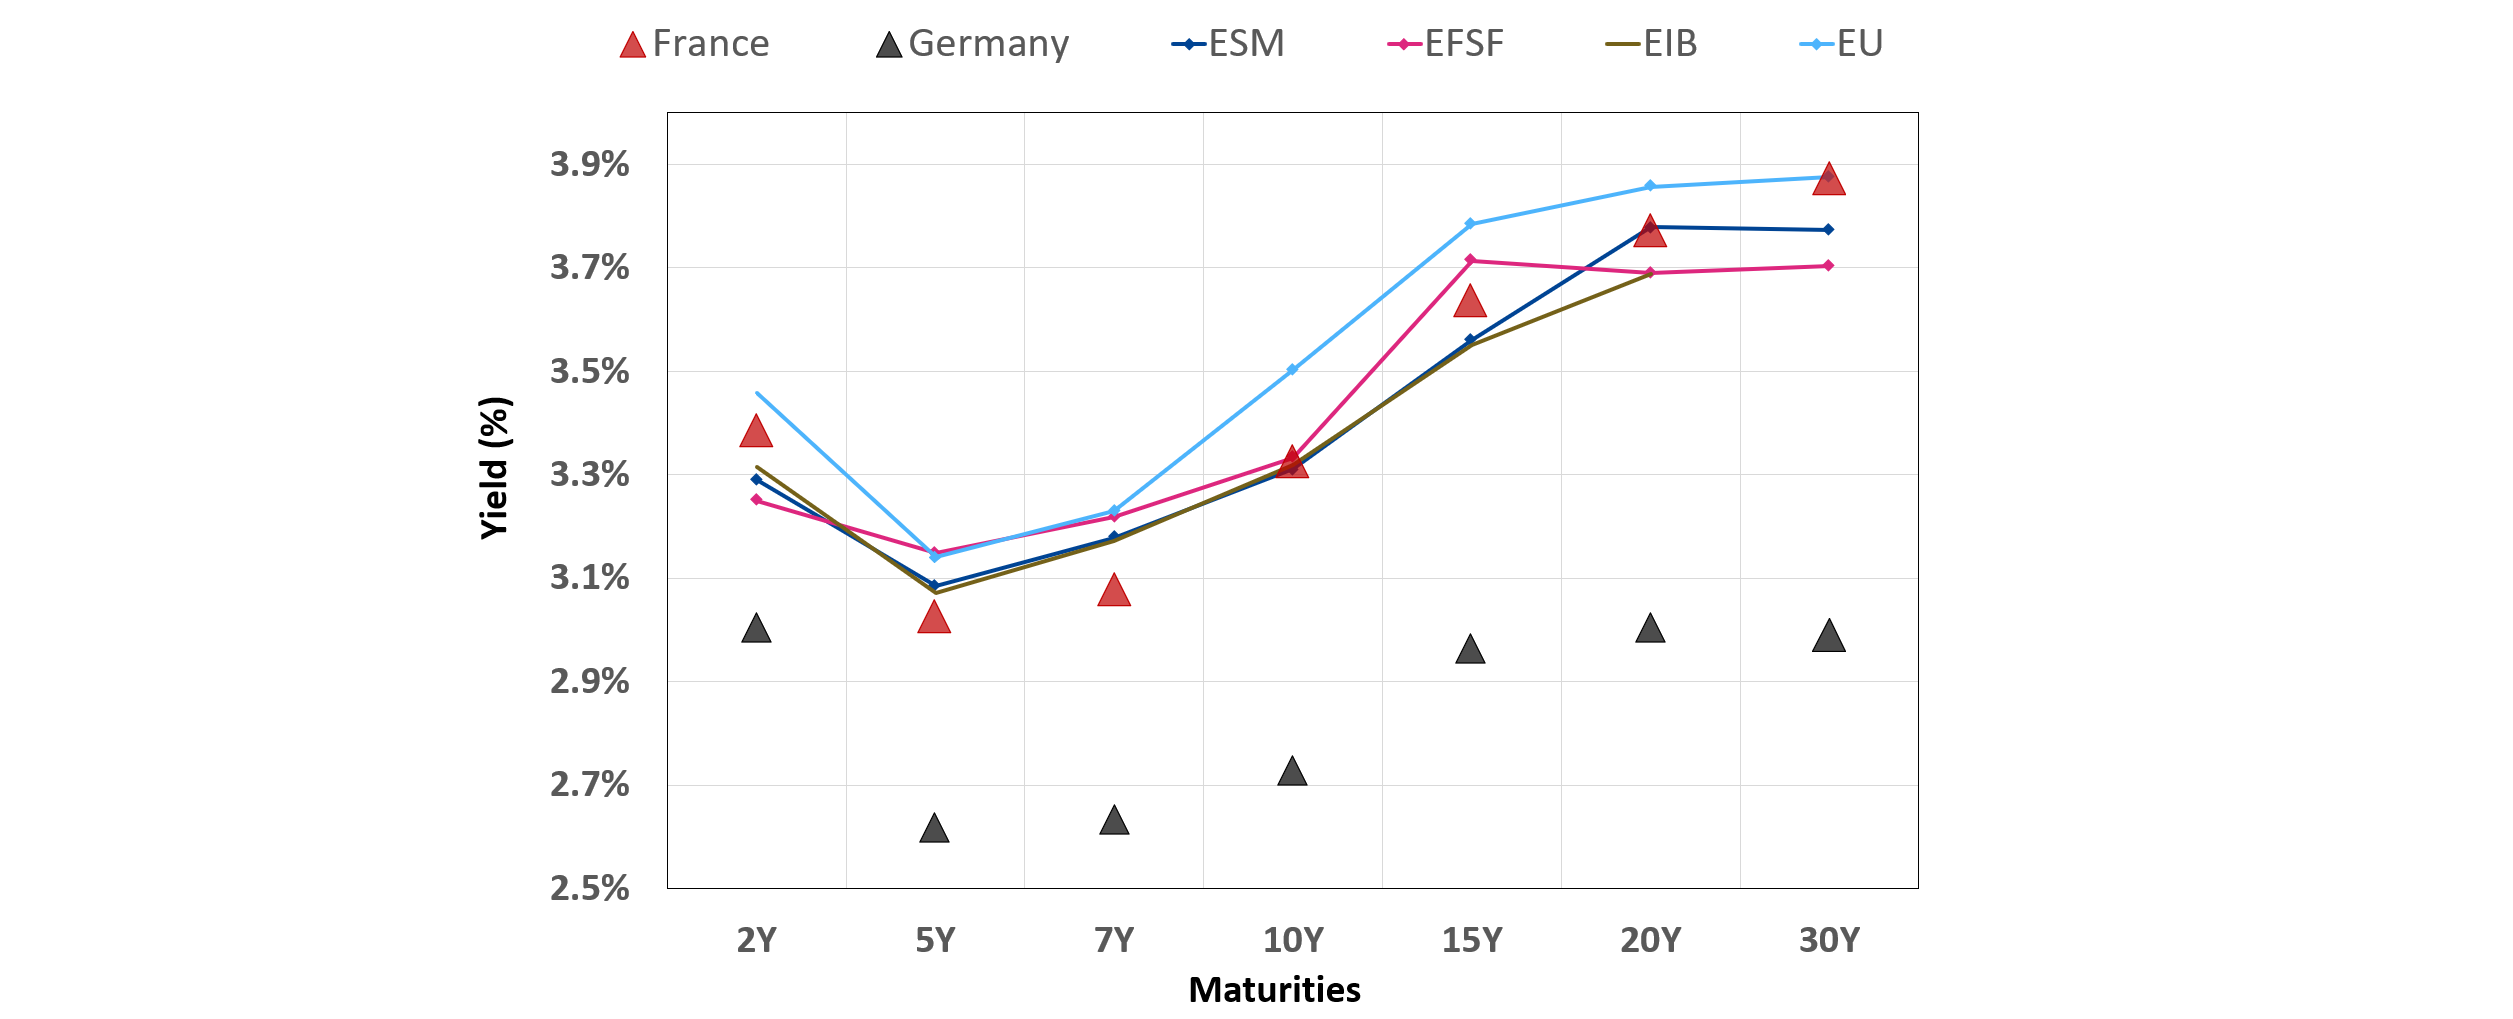 Figure 2: yield curve of the four European supranational issuers versus Germany and France